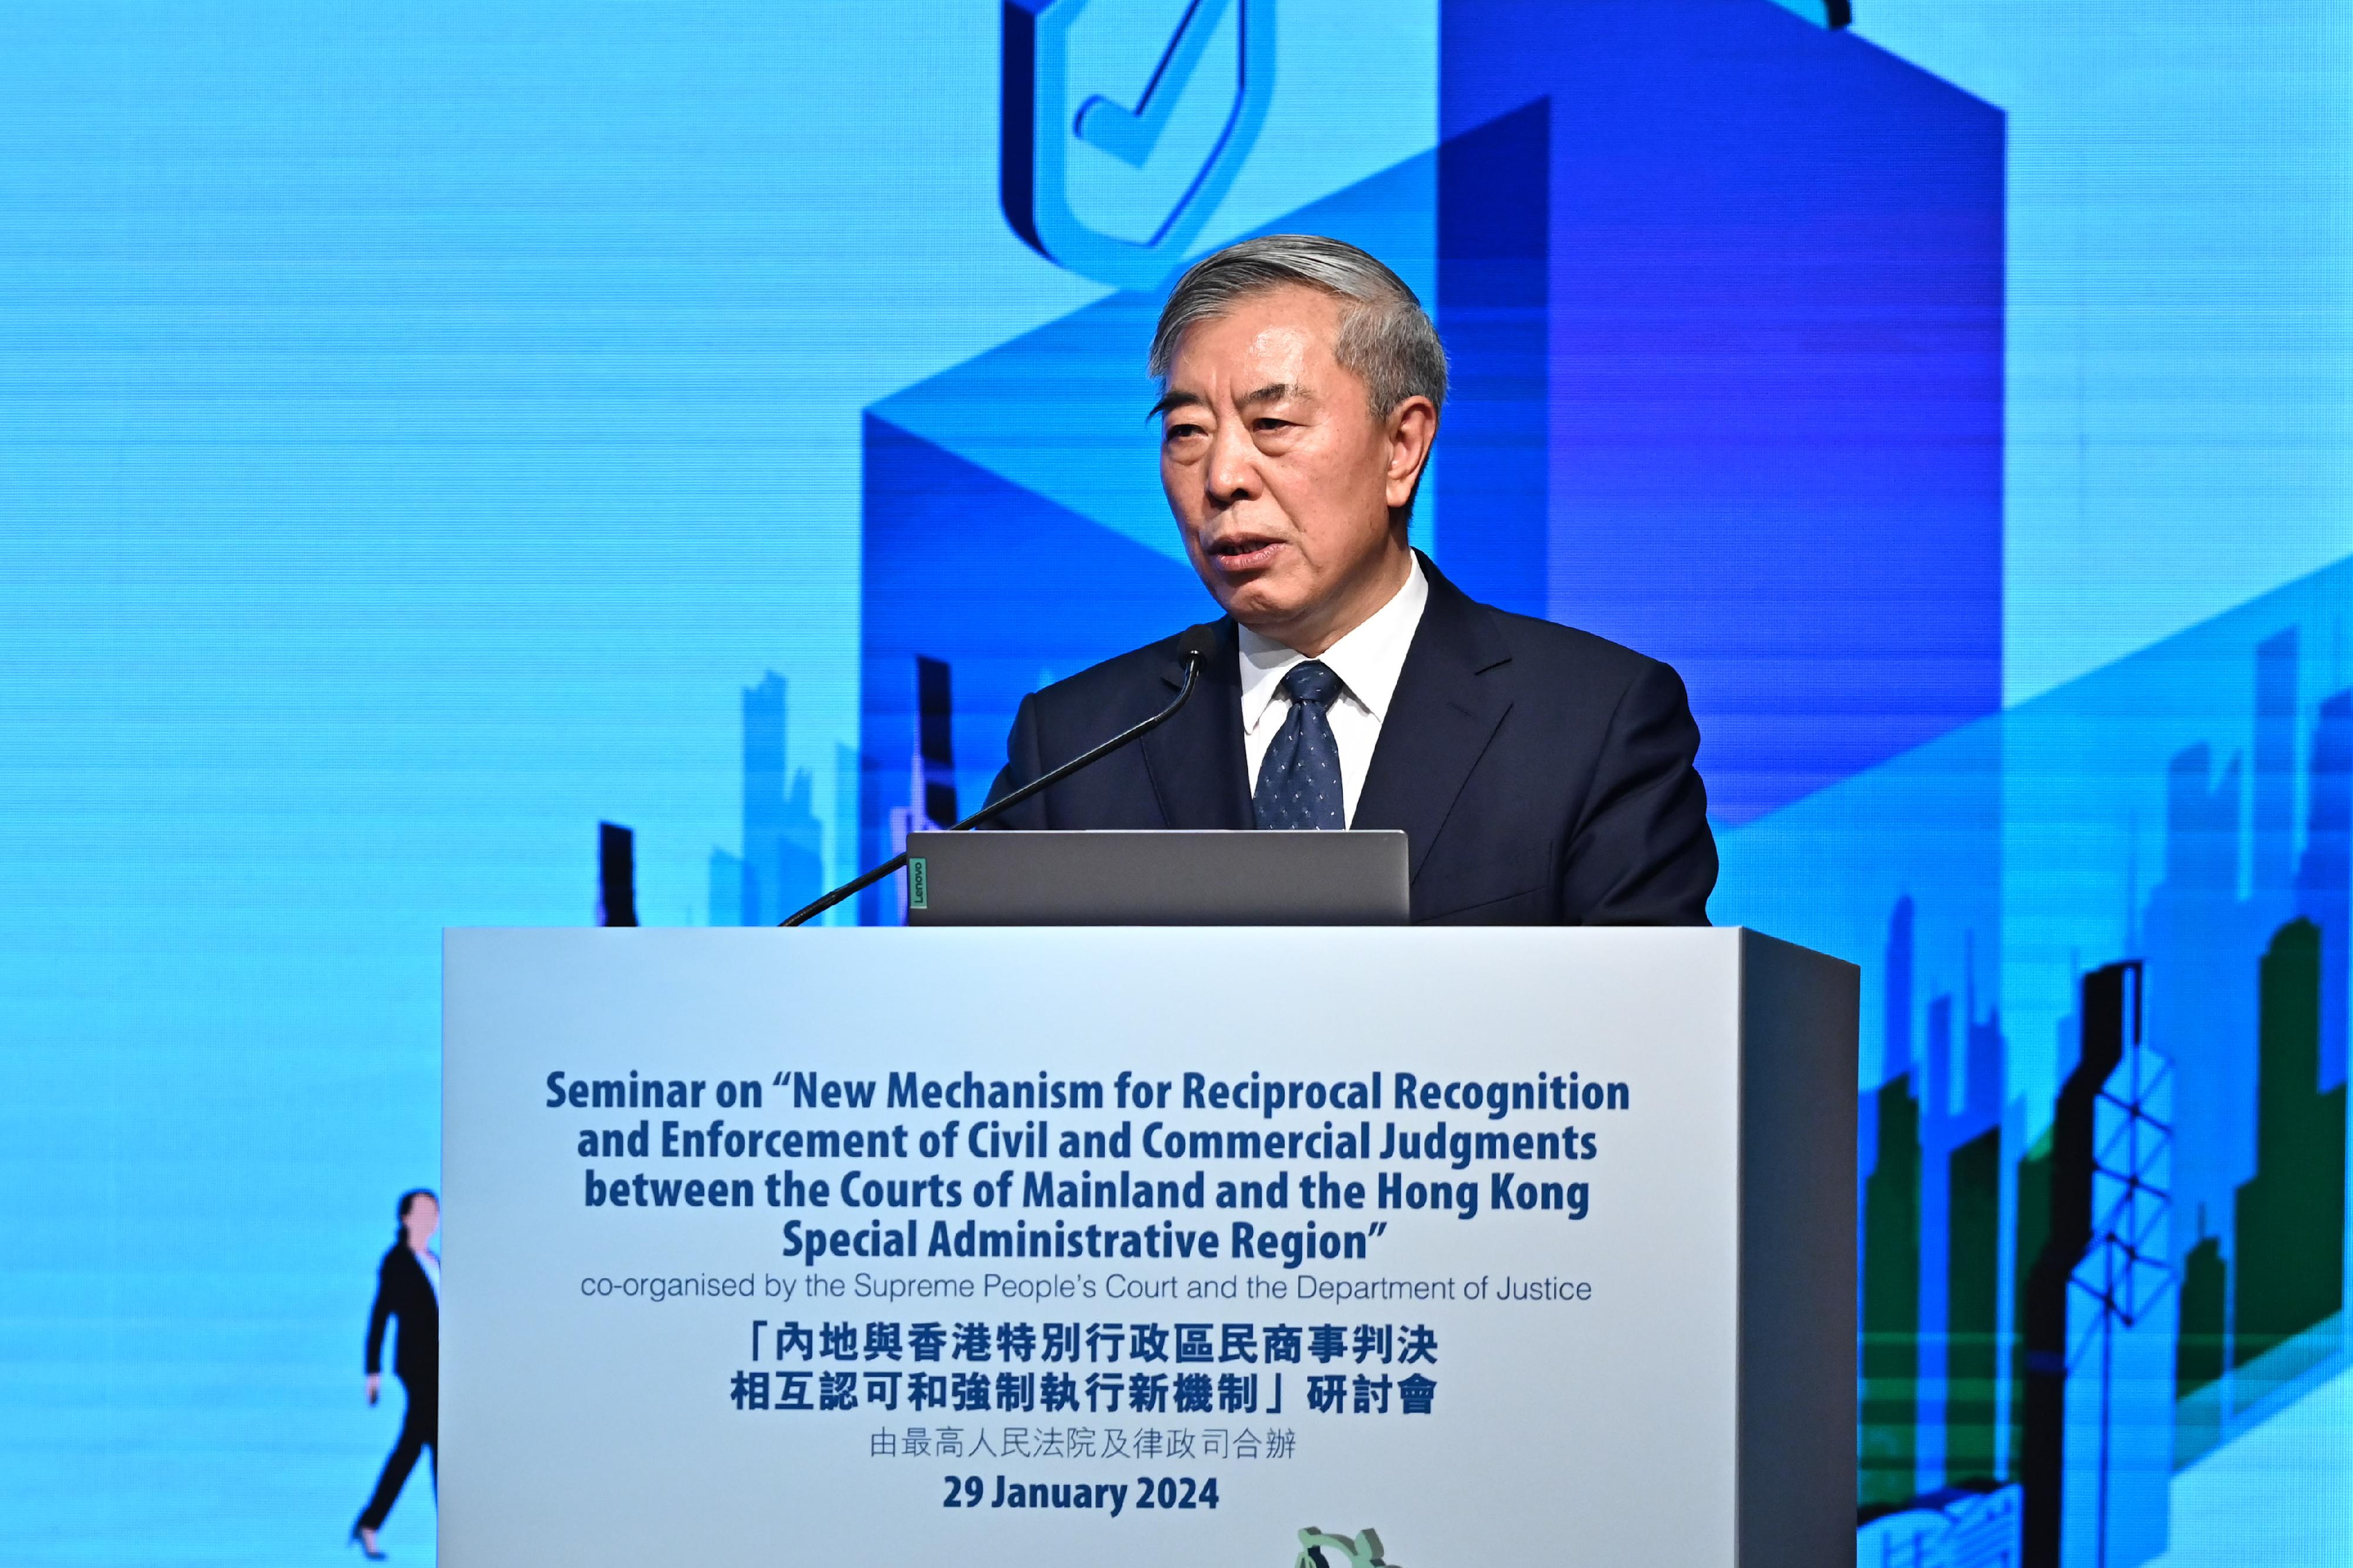 The seminar on "New Mechanism for Reciprocal Recognition and Enforcement of Civil and Commercial Judgments between the Courts of Mainland and the Hong Kong Special Administrative Region" co-organised by the Supreme People's Court (SPC) and the Department of Justice was held today (January 29). Photo shows Vice-president of the SPC Mr Yang Wanming delivering his opening remarks at the seminar.
